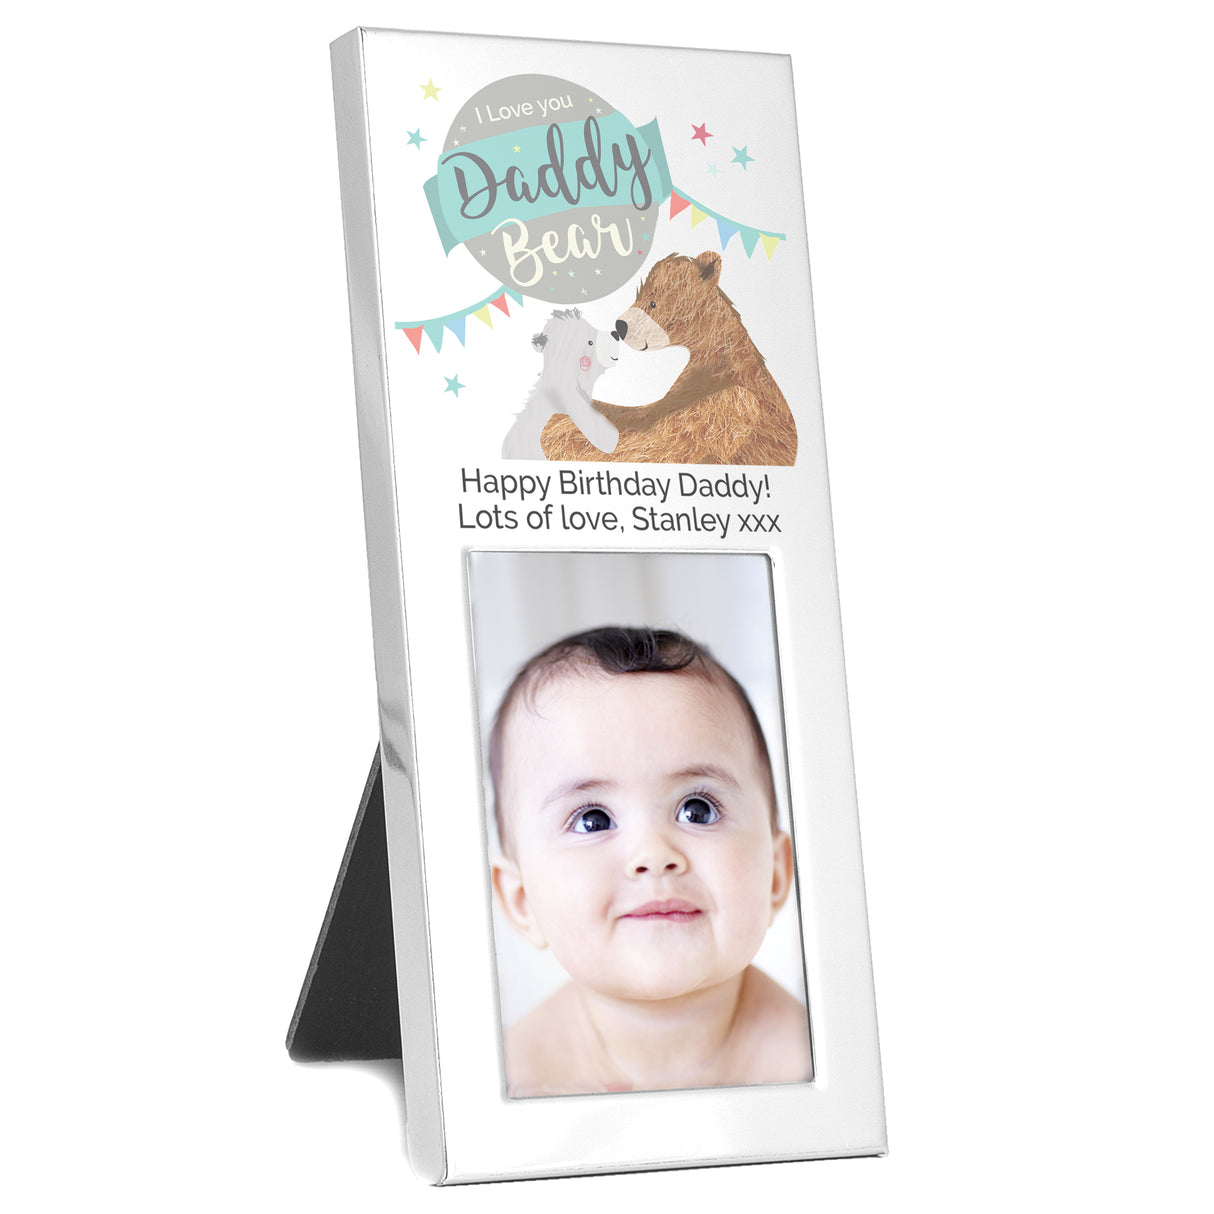 Daddy Bear - Personalised Photo Frame